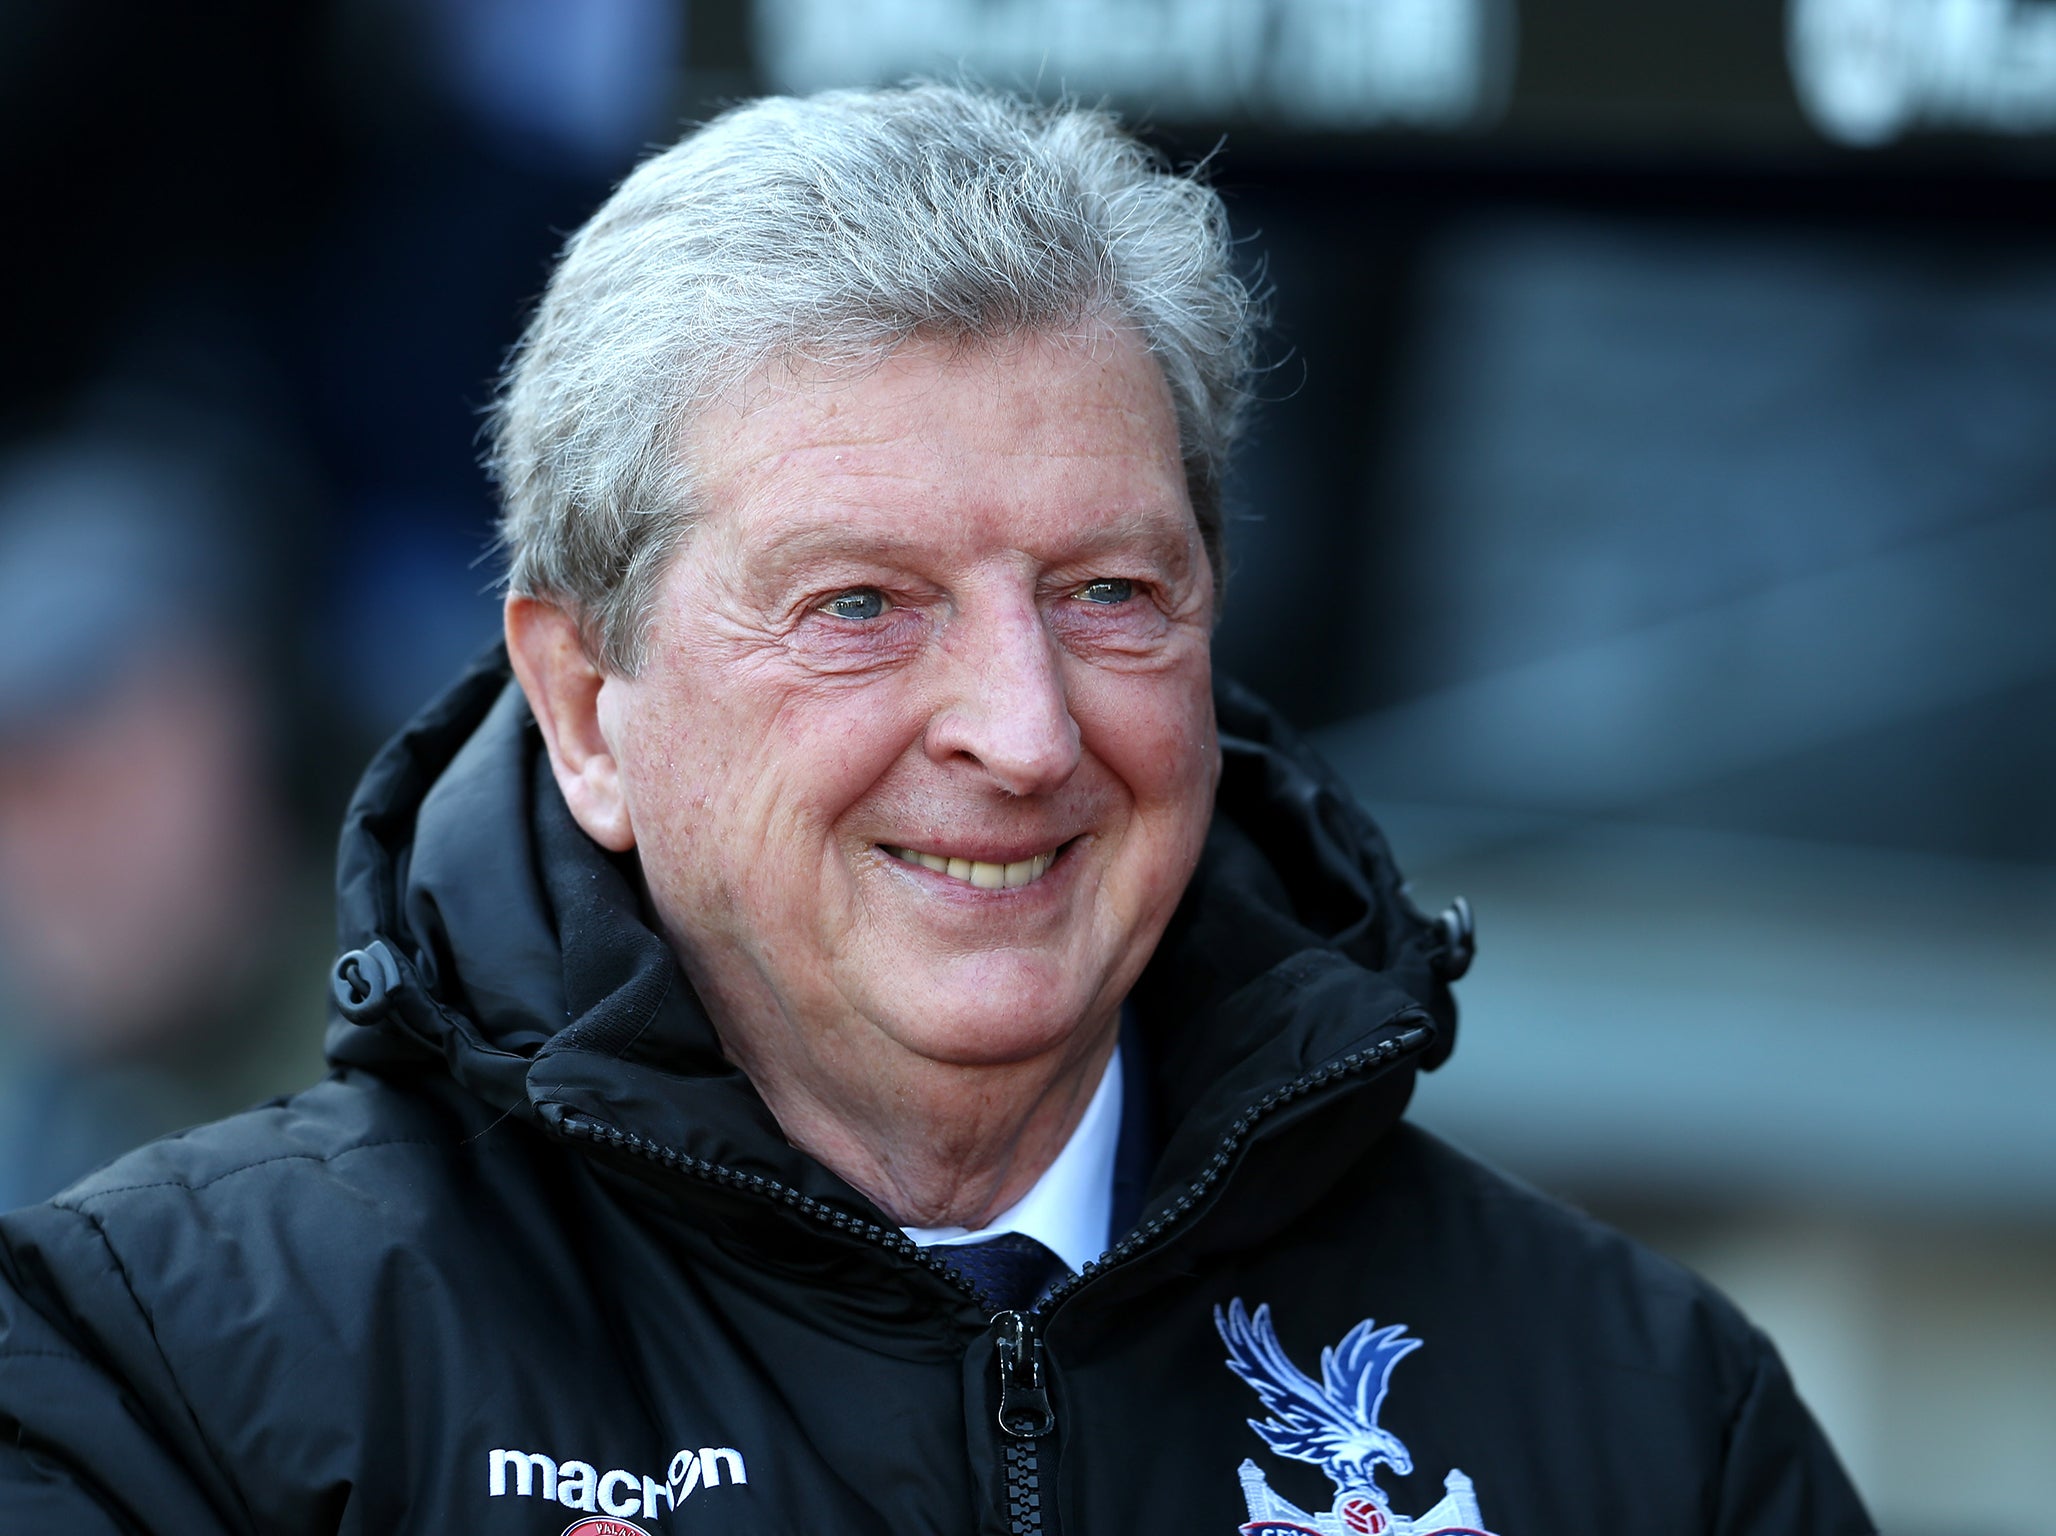 Roy Hodgson was named Manager of the Year